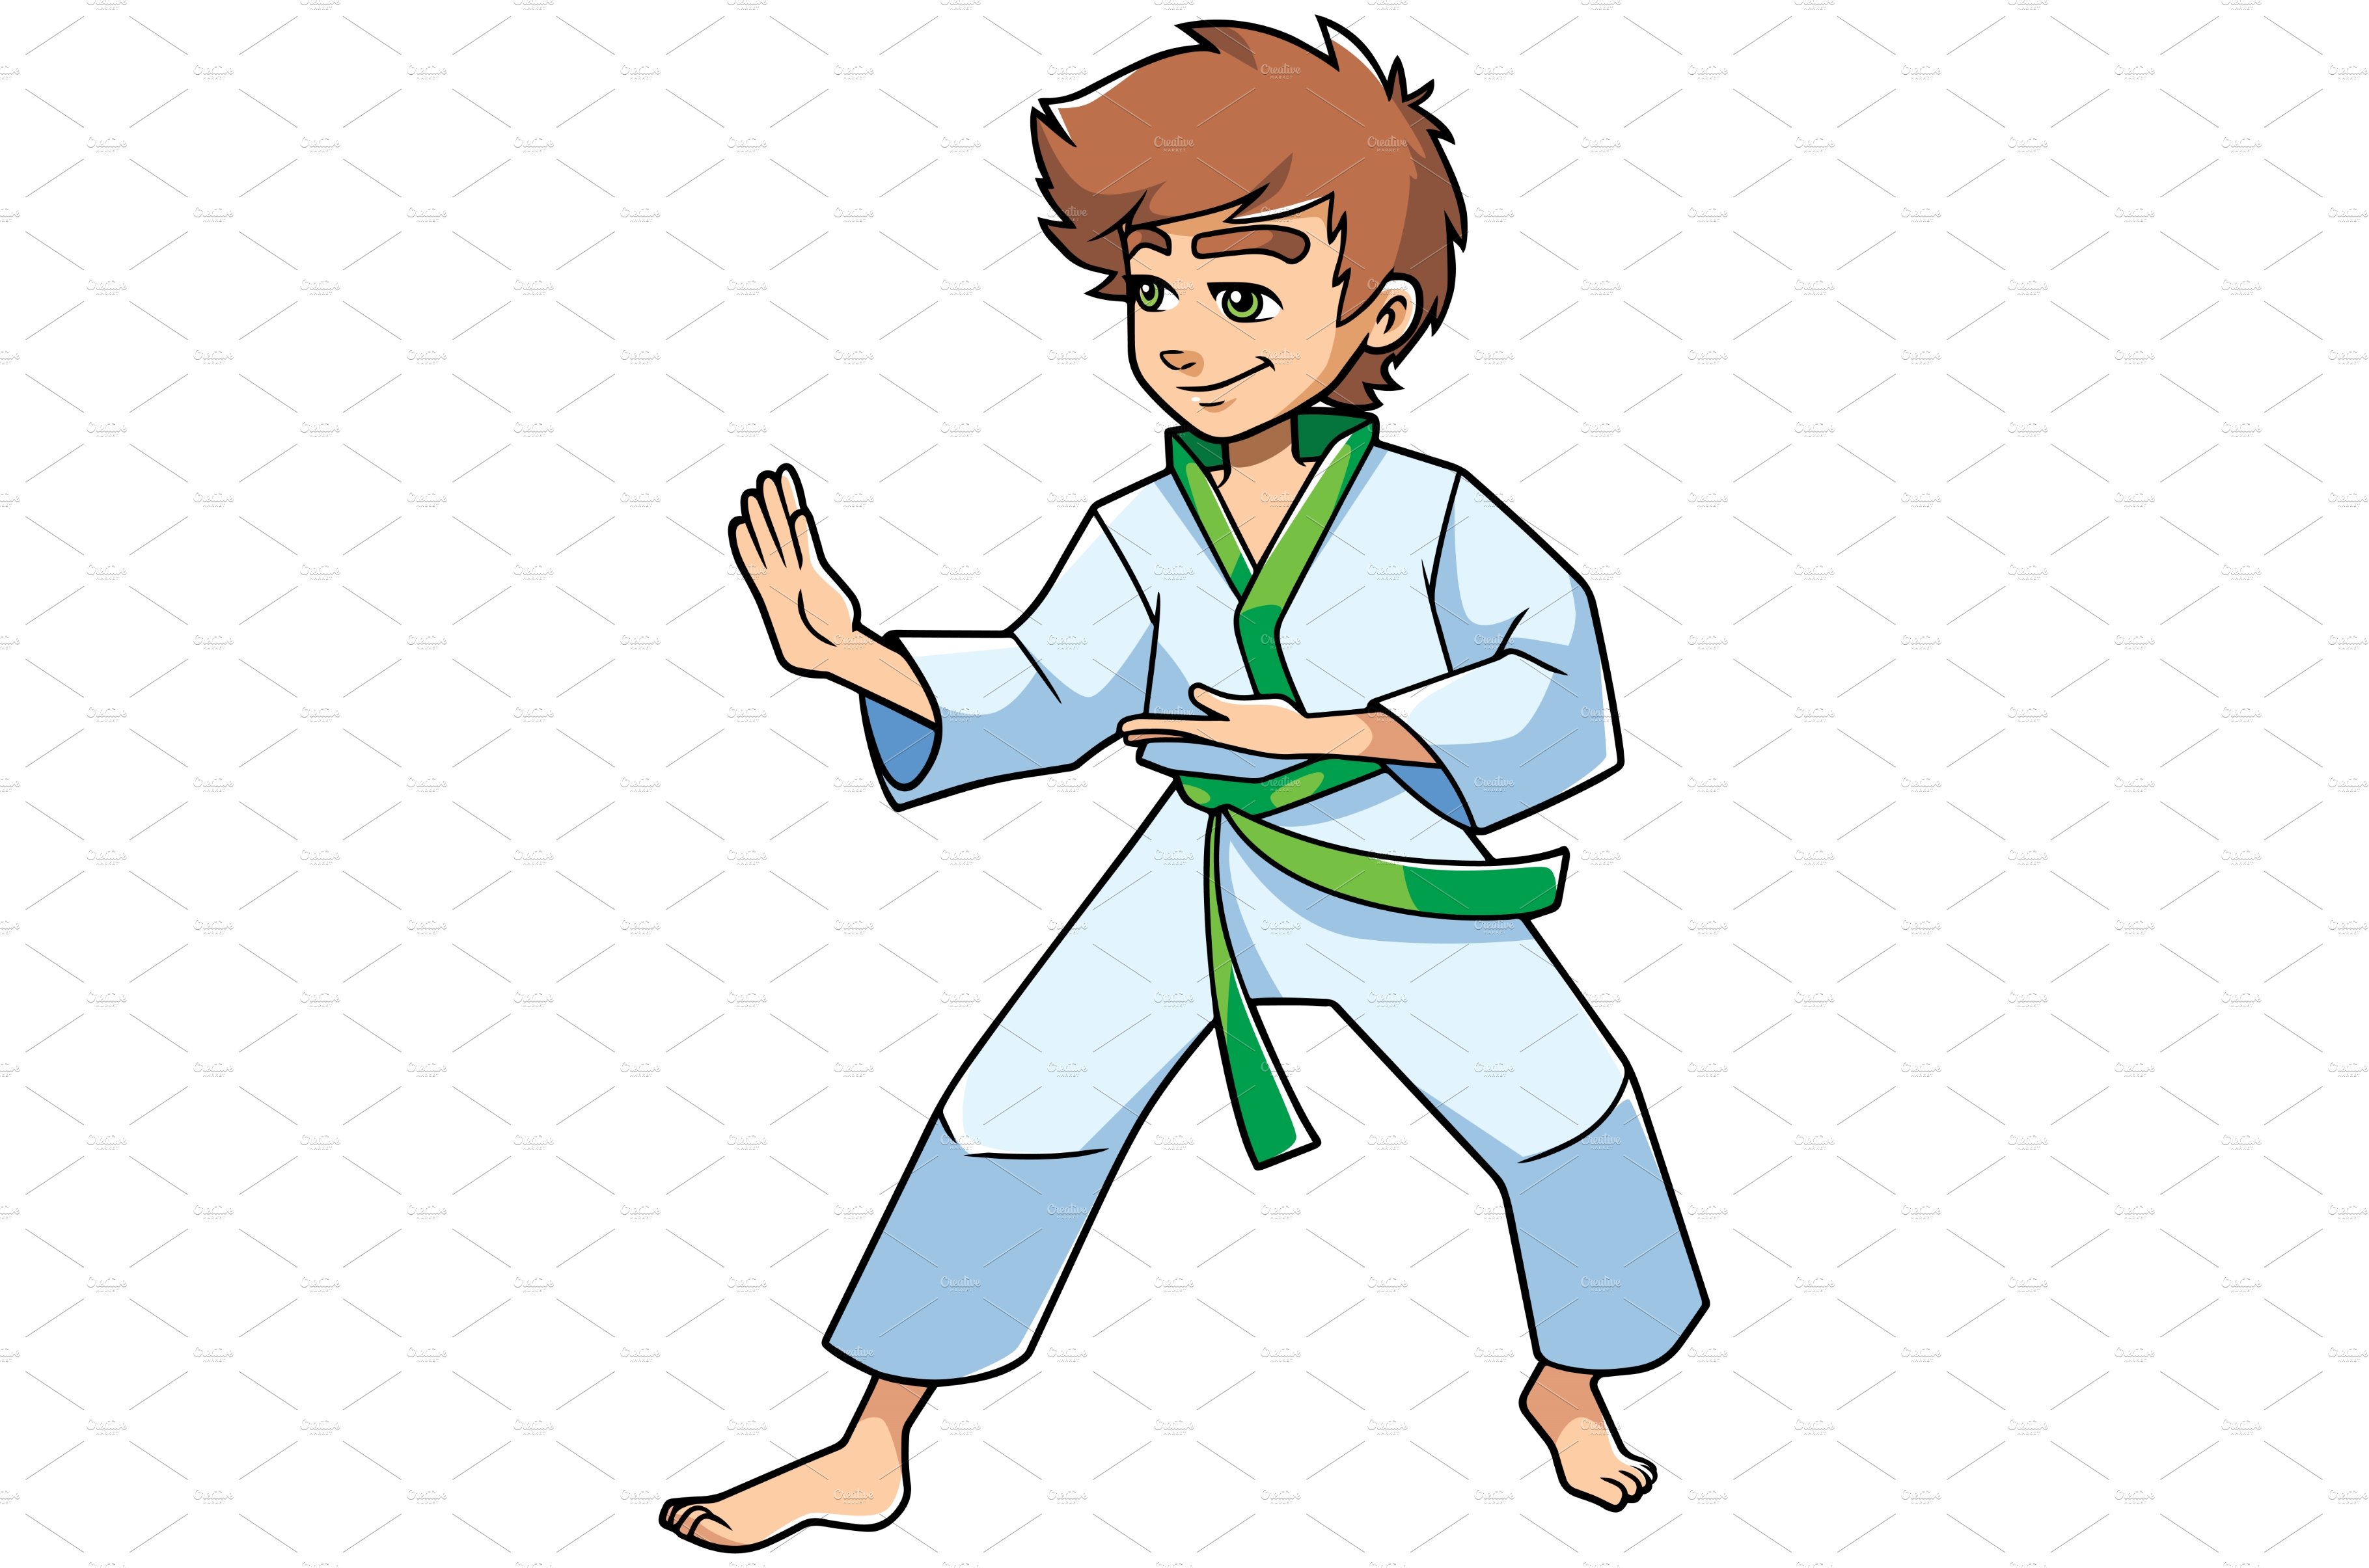 Karate Stance Boy cover image.